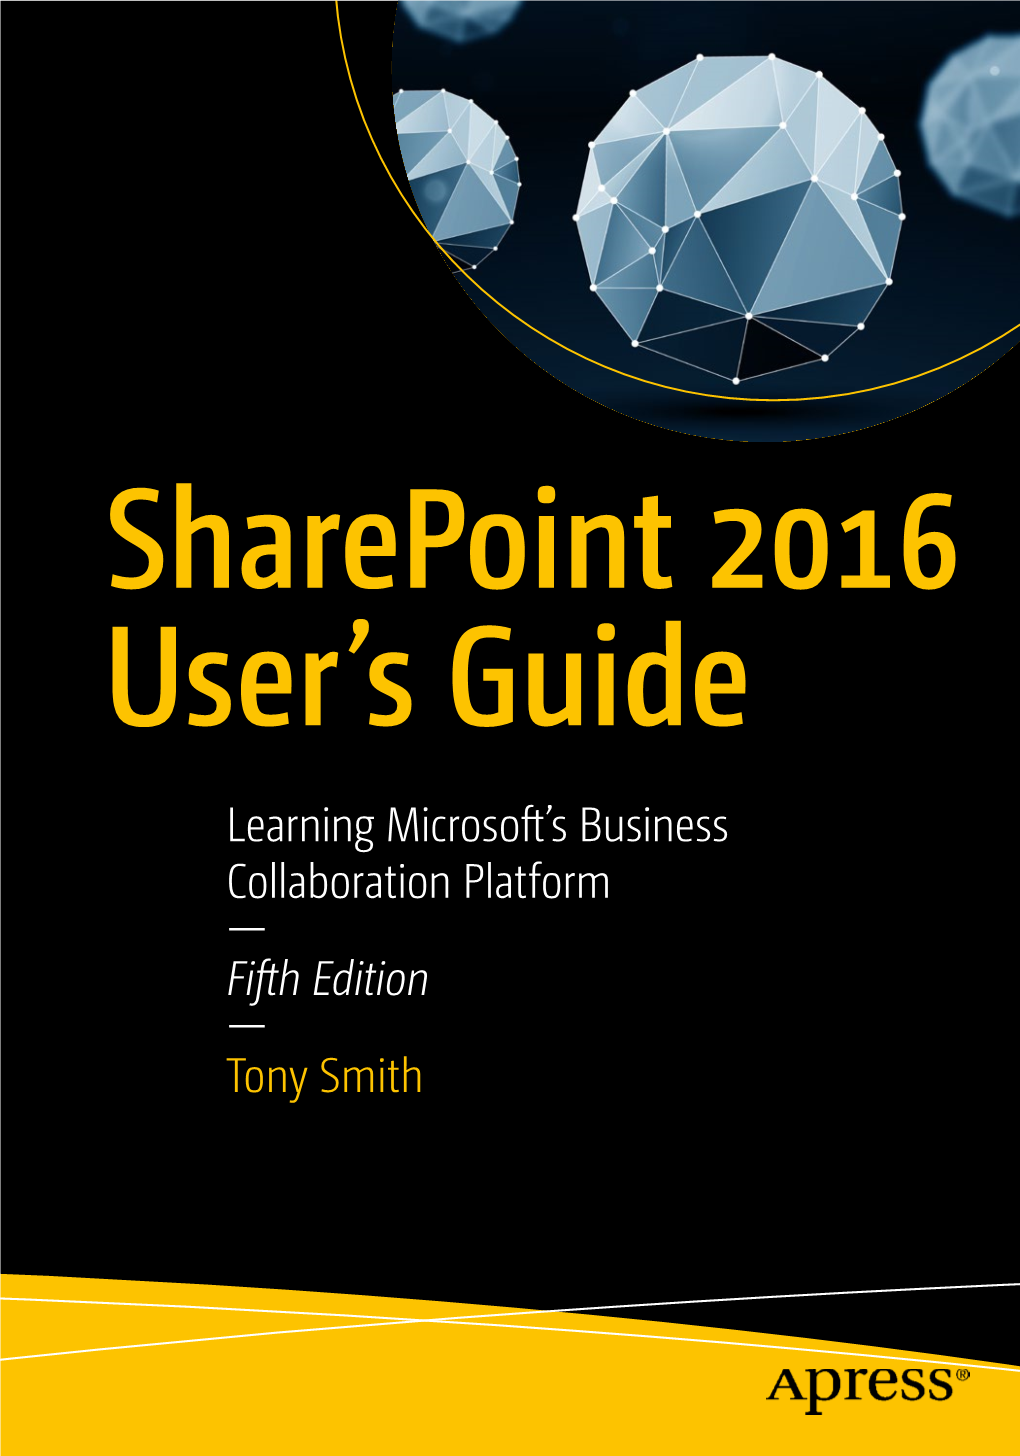 Sharepoint 2016 User's Guide, DOI 10.1007/978-1-4842-2244-7 ■ INDEX